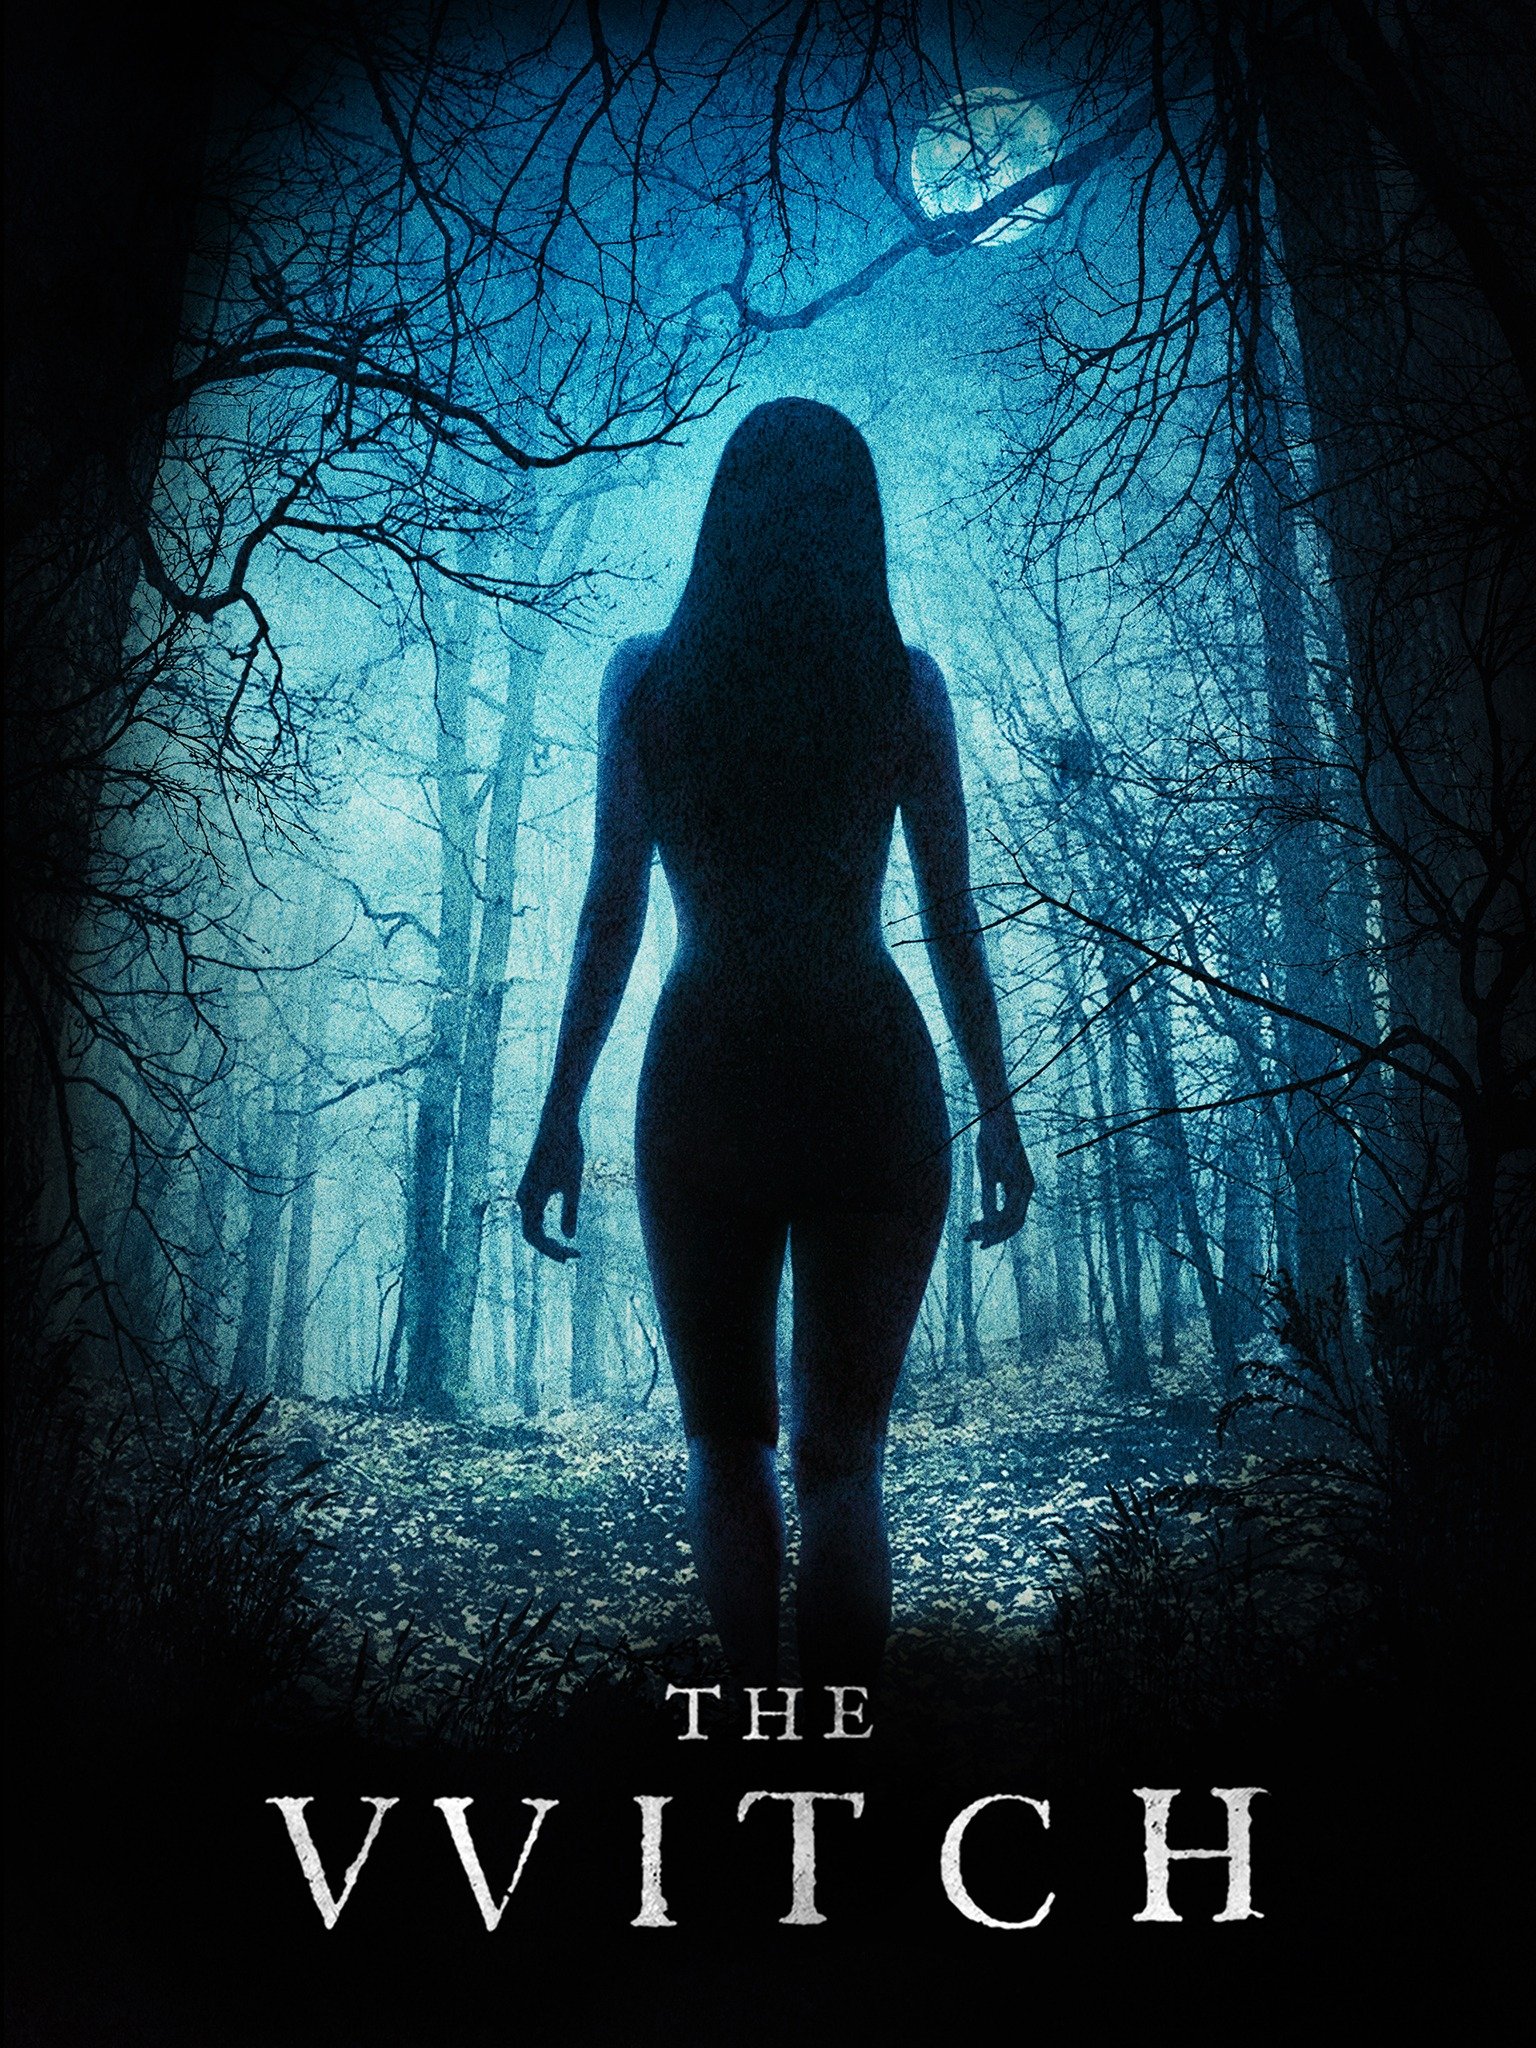 The Witch 2015 Dual Audio Hindi 480p BluRay 300MB ESub Download